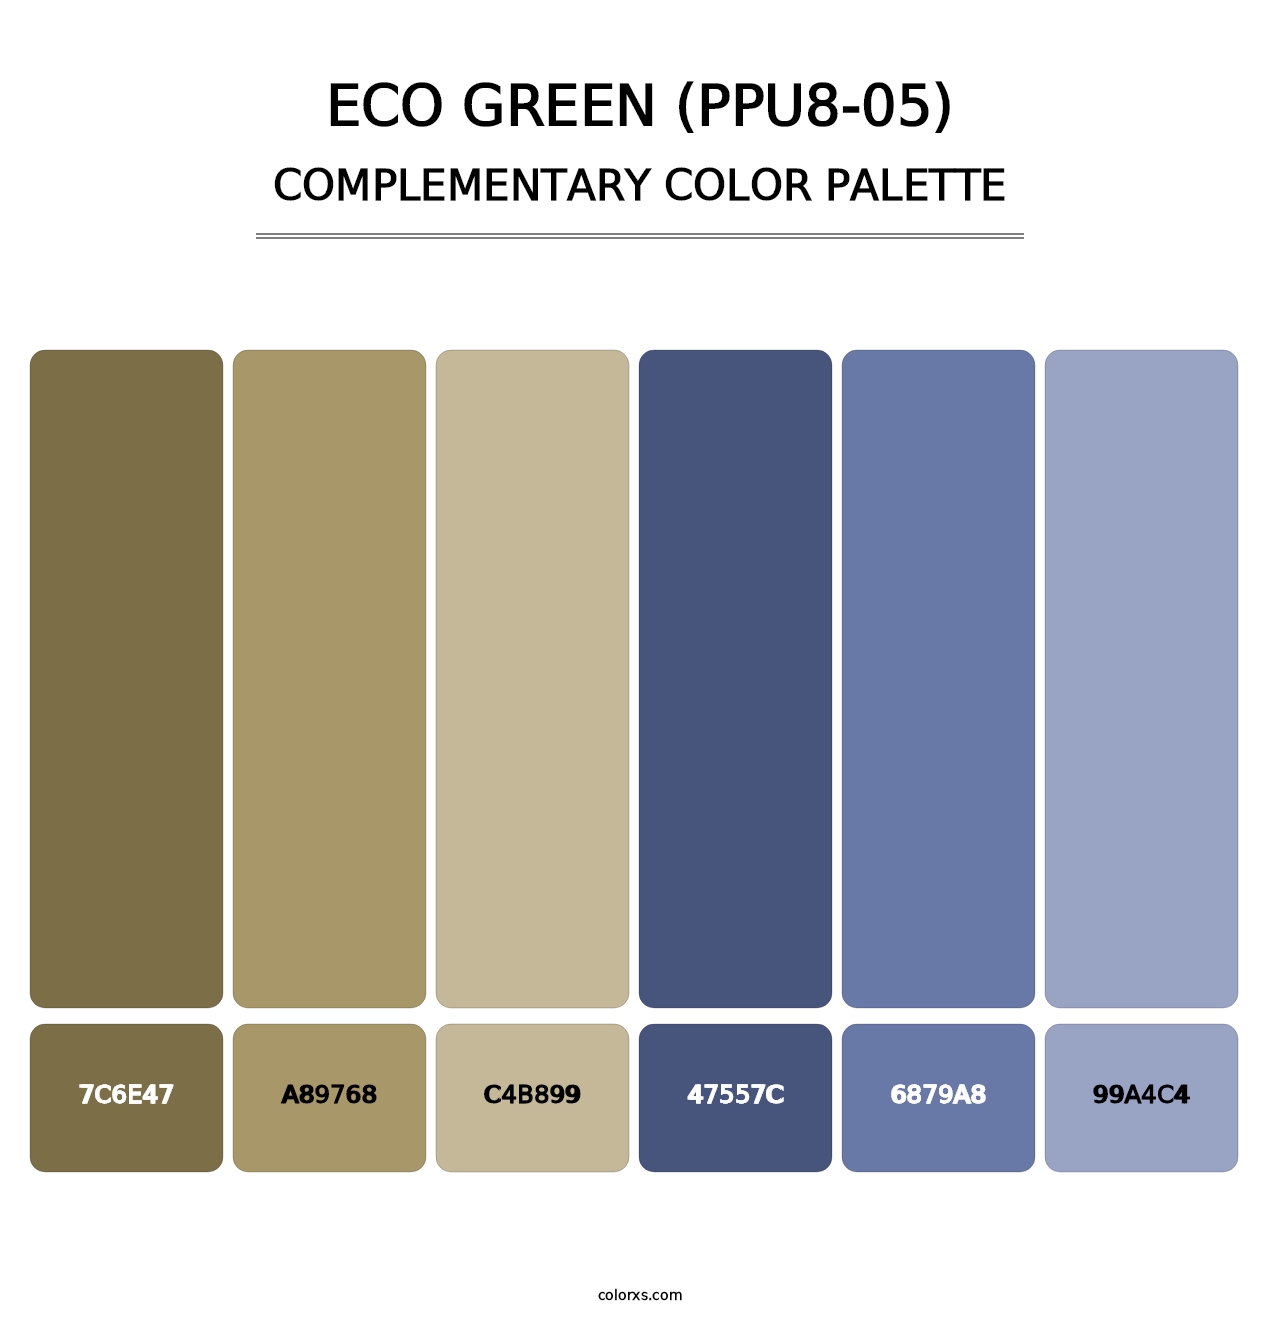 Eco Green (PPU8-05) - Complementary Color Palette